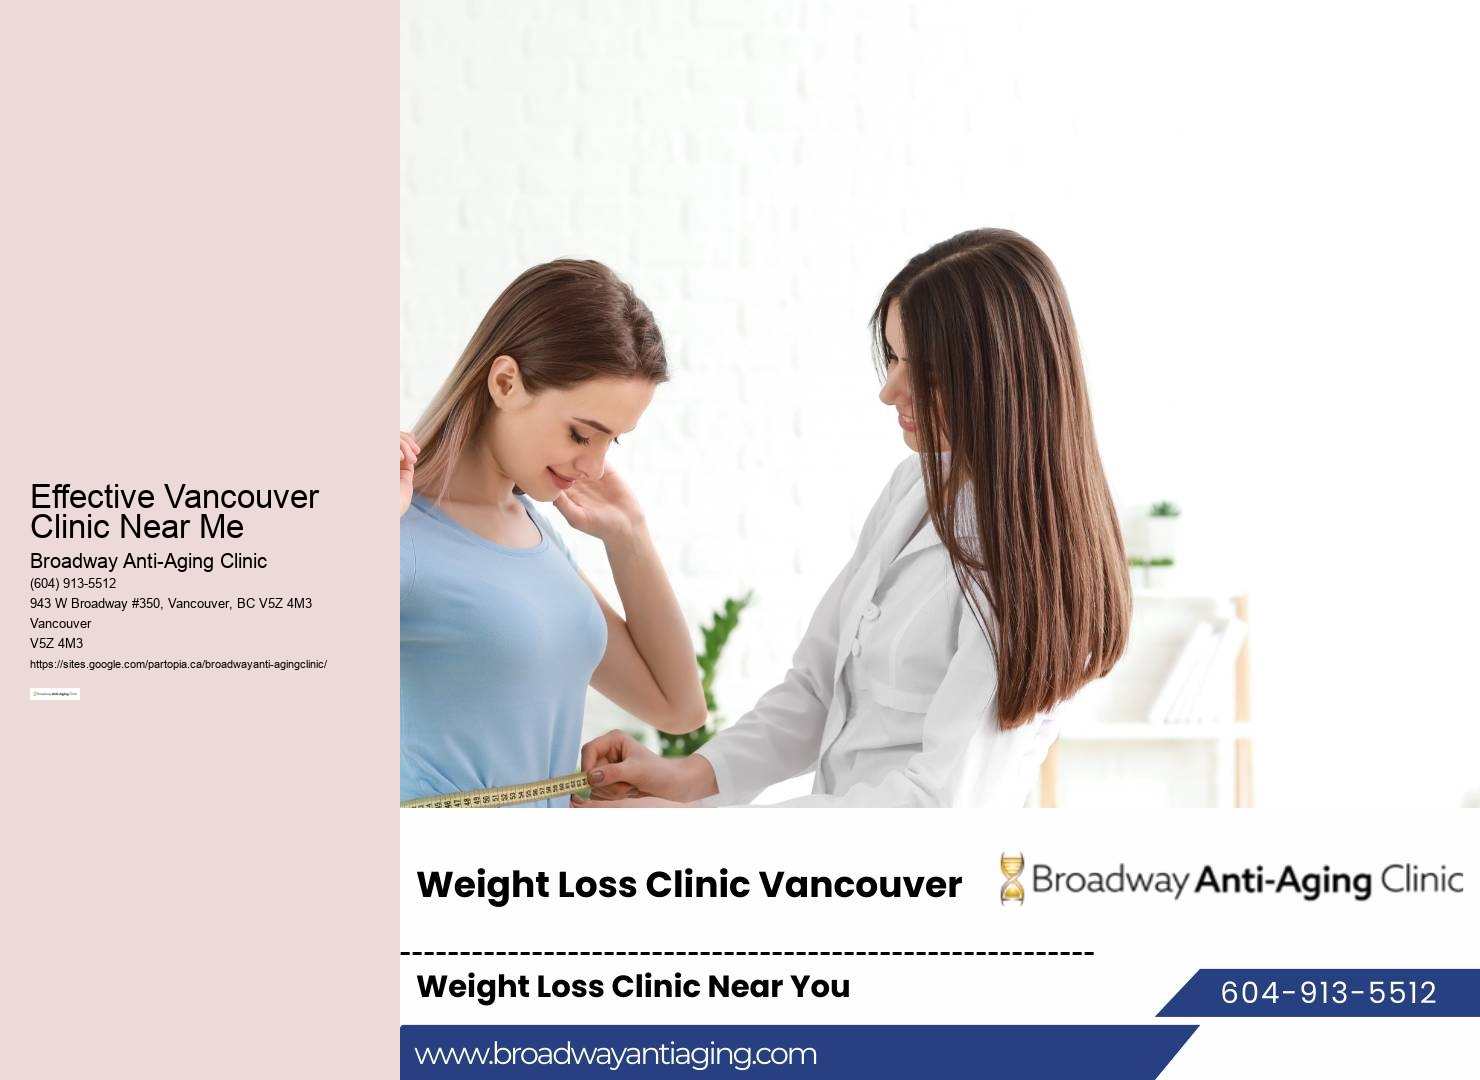 Effective Vancouver Clinic Near Me